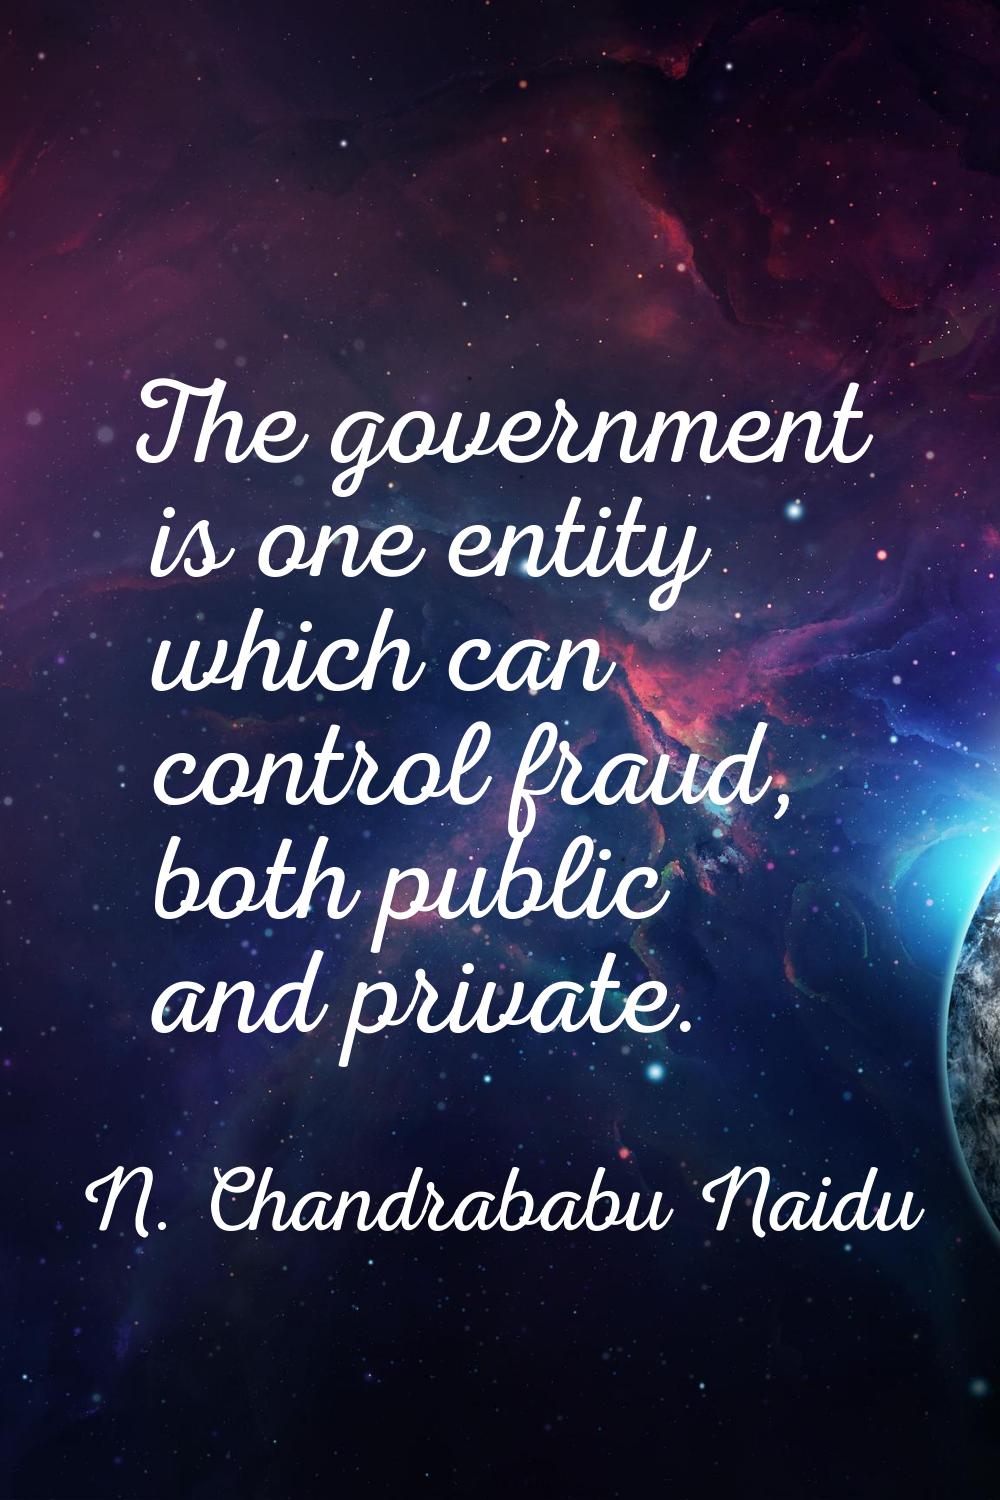 The government is one entity which can control fraud, both public and private.